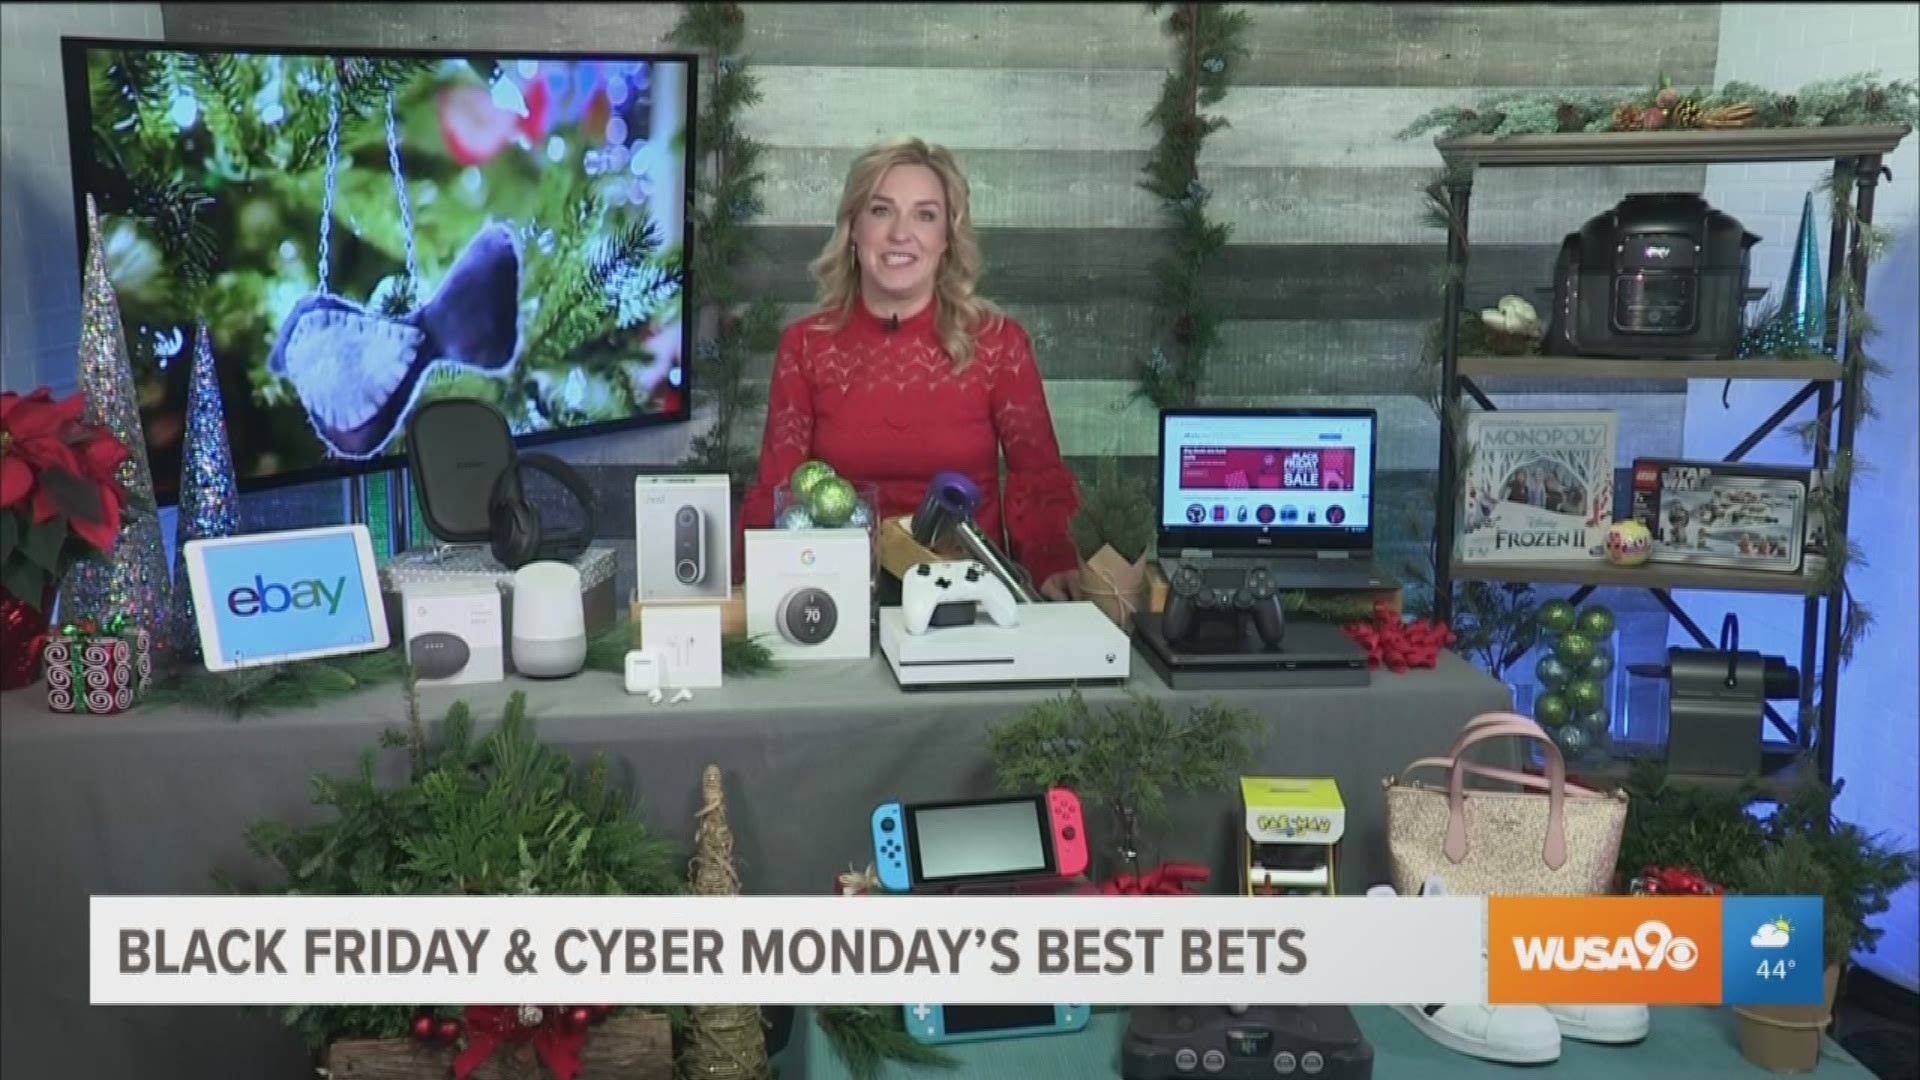 Tech and Life Columnist Jennifer Jolly is here to share what to look out for this Black Friday and Cyber Monday. This segment was sponsored by eBay.